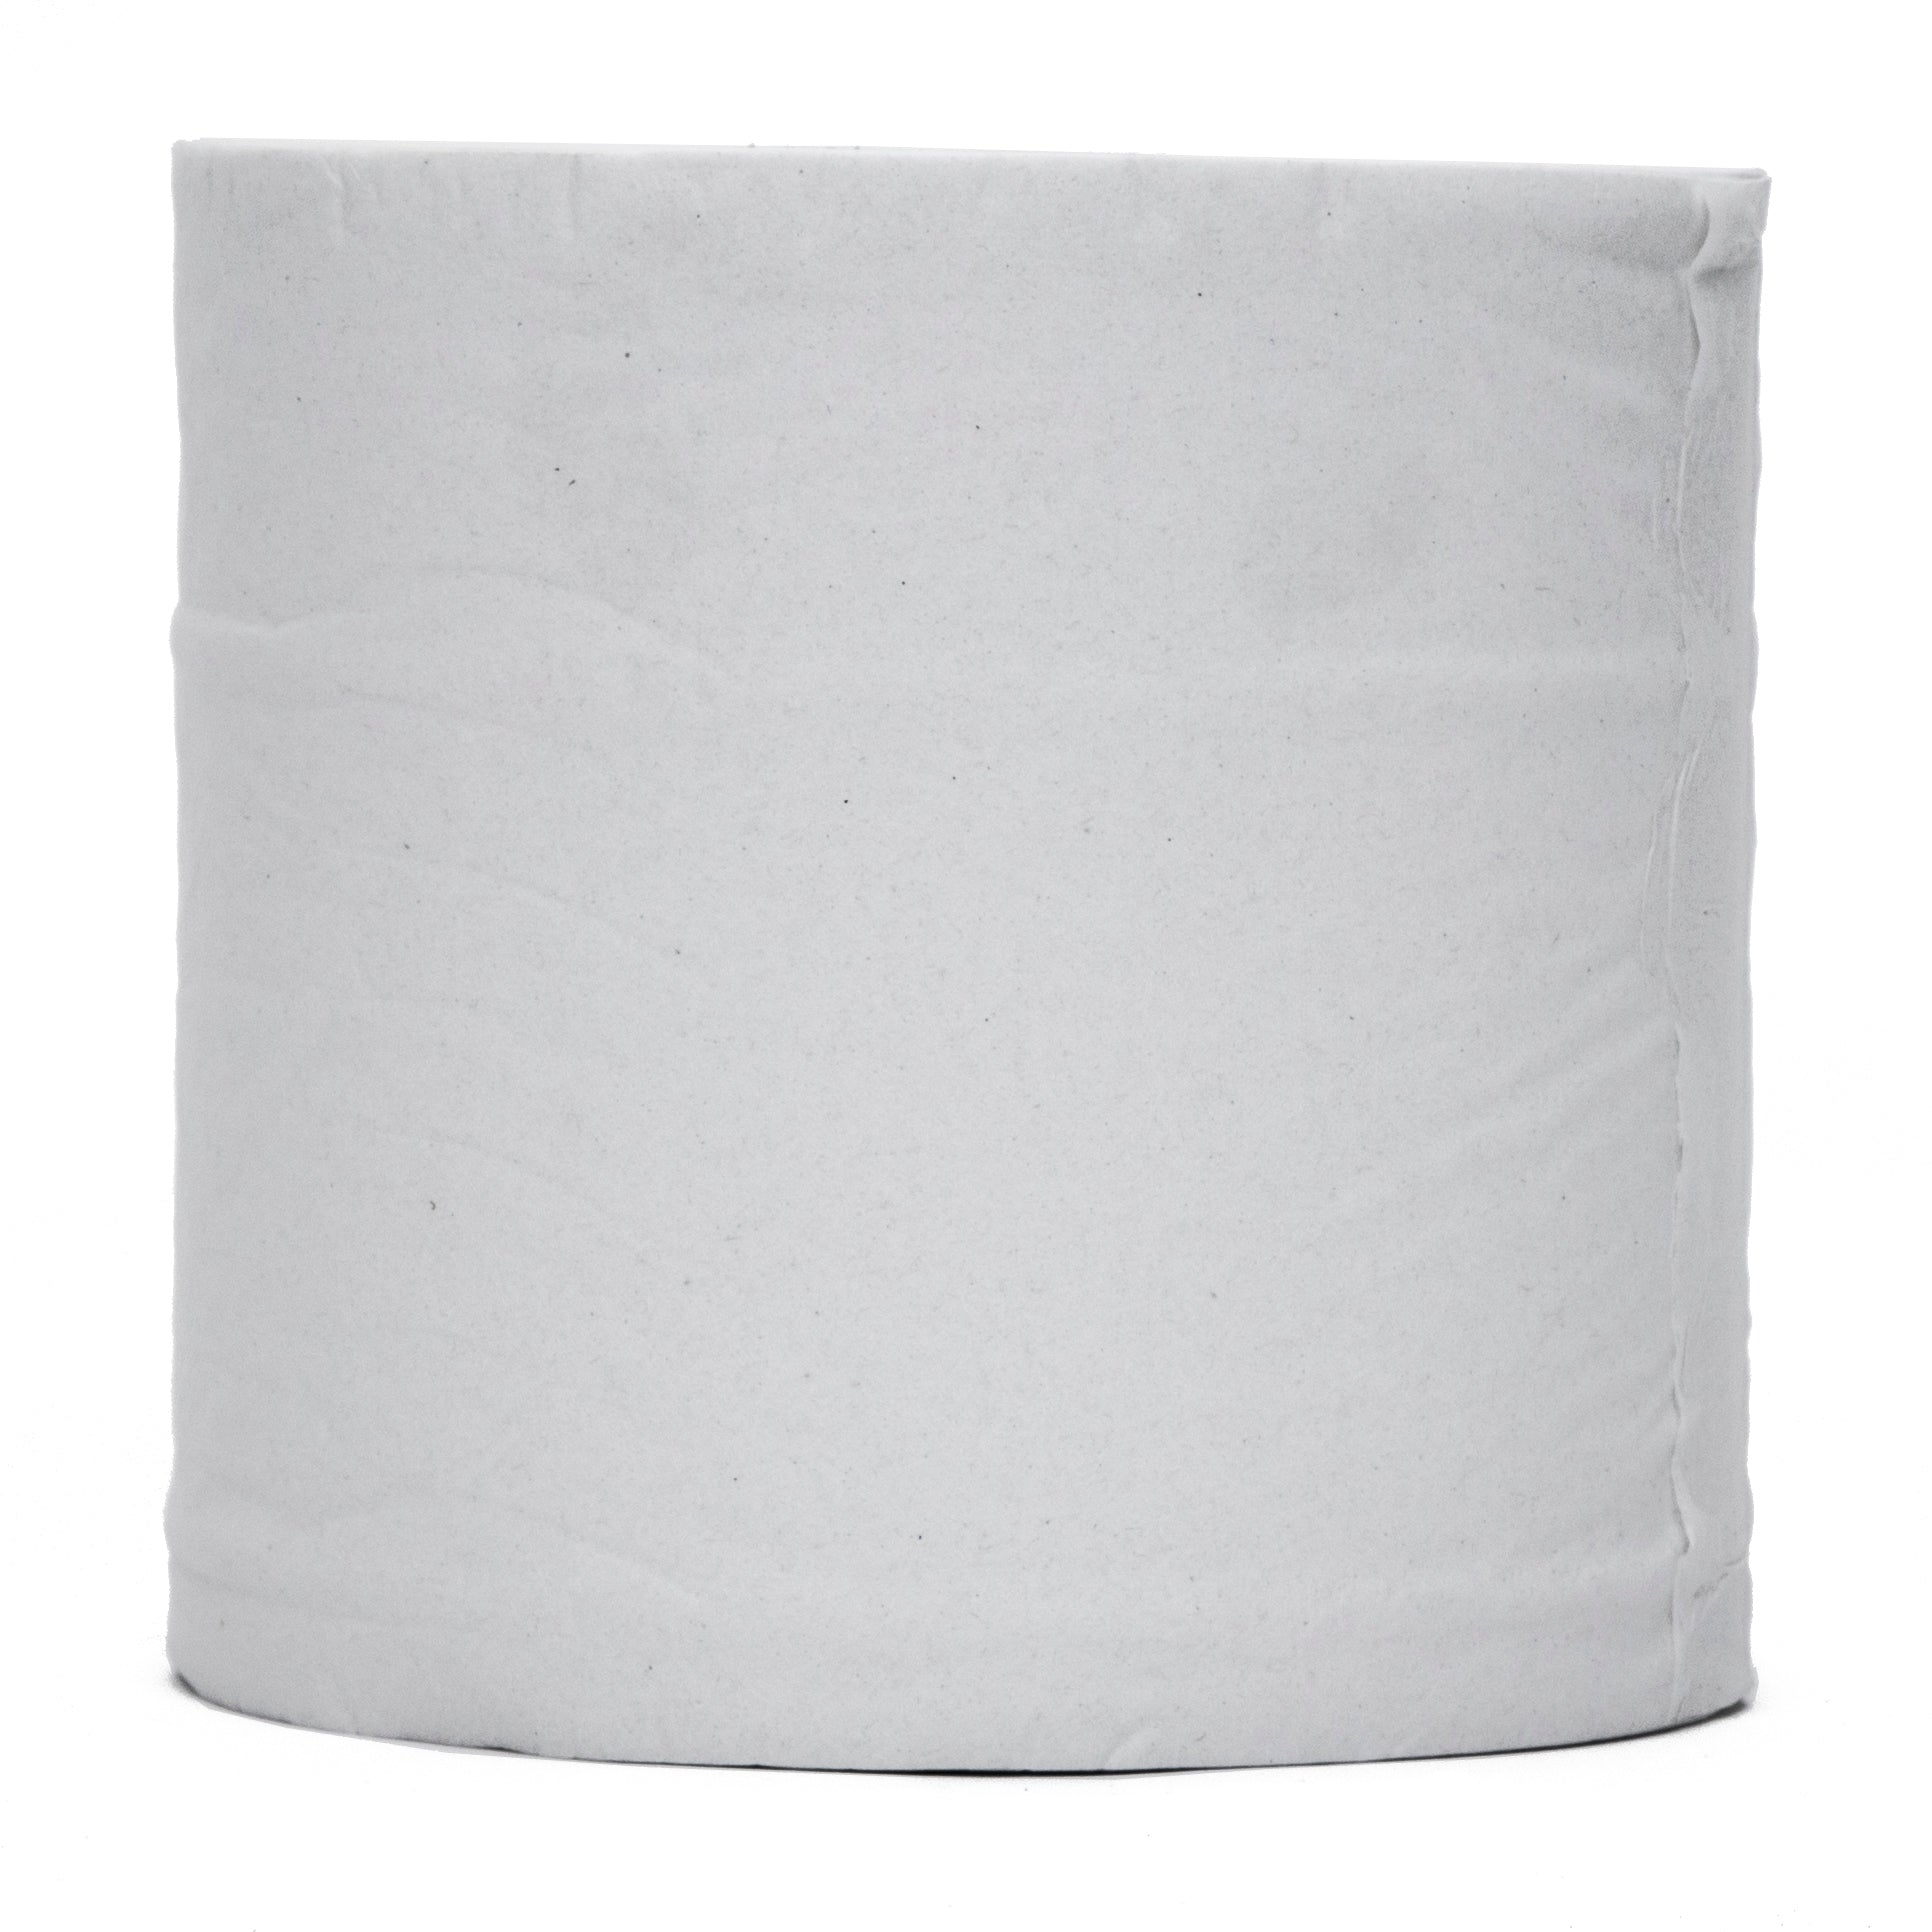 2 Ply Standard Centrefeed White Wiper Roll Standing